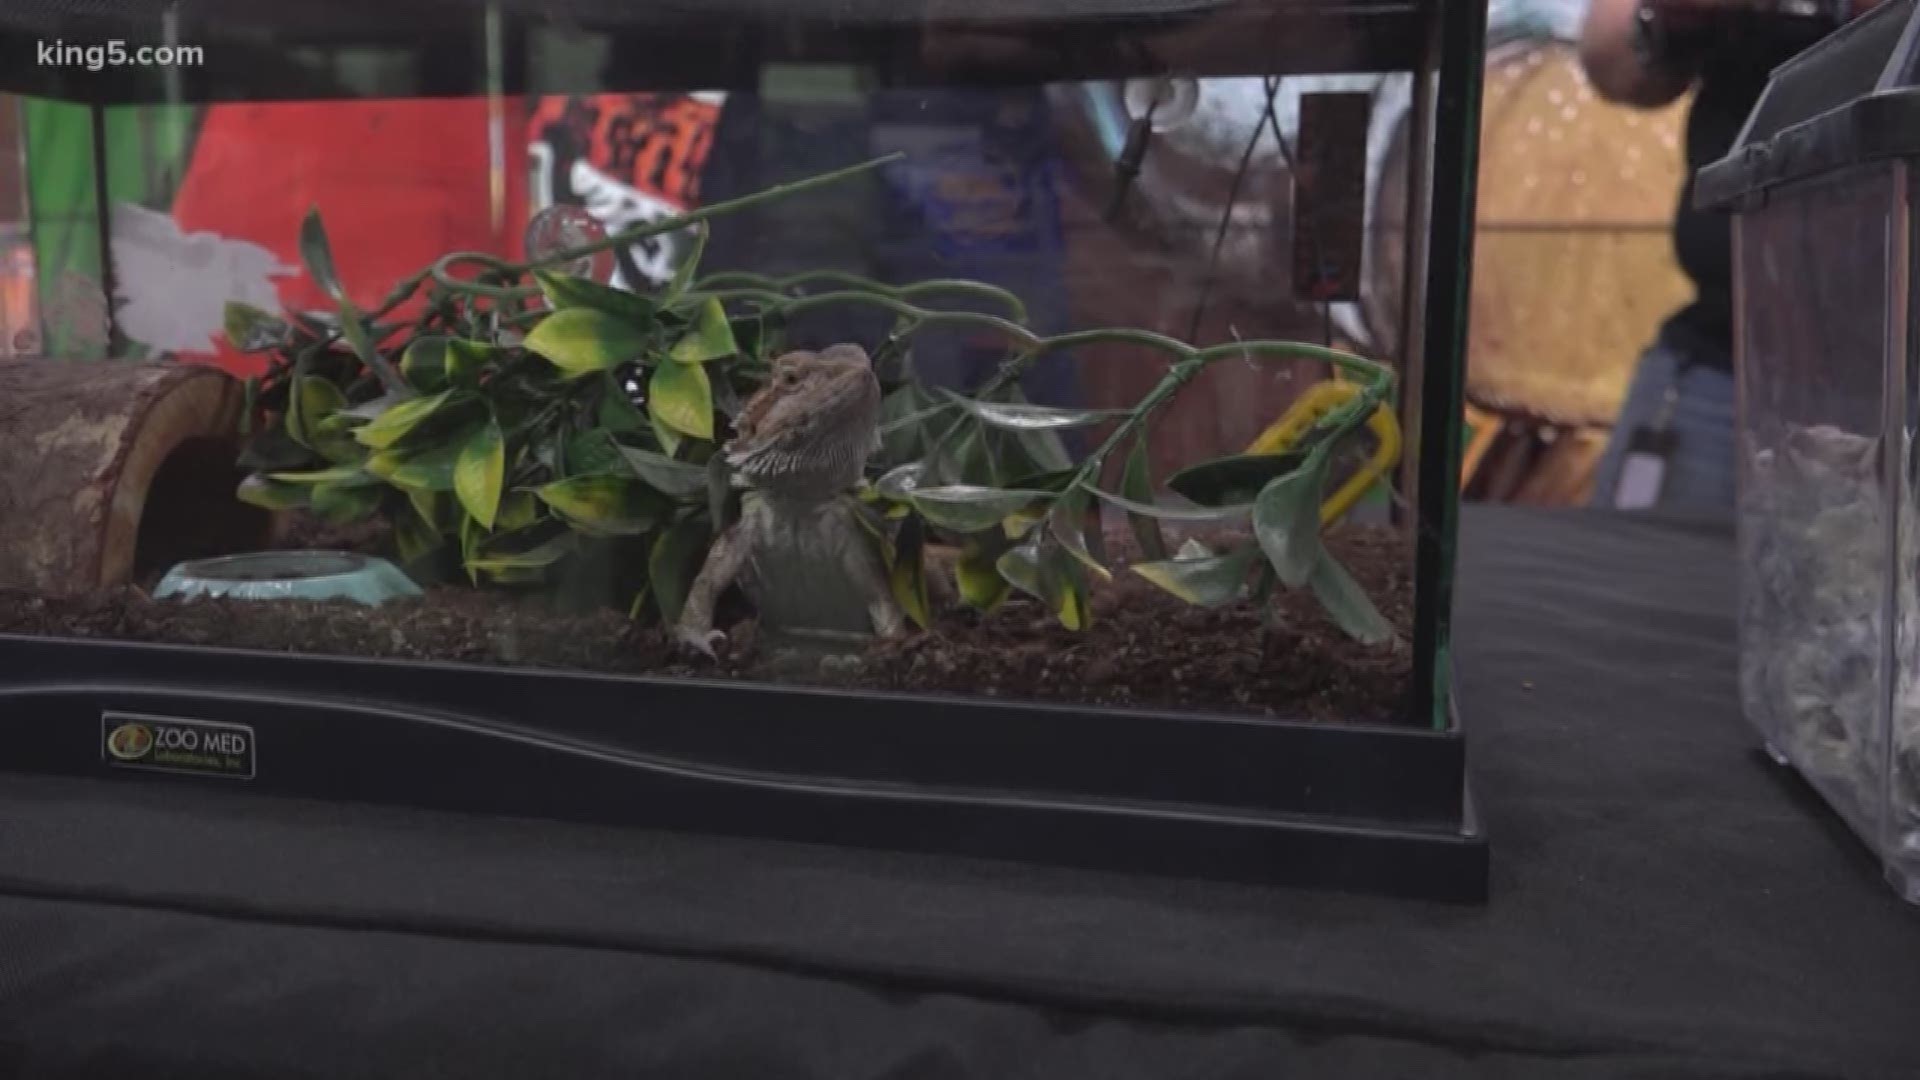 The Pacific Northwest Reptile and Exotic Animal Show brings hundreds of vendors and thousands of visitors together. #k5evening